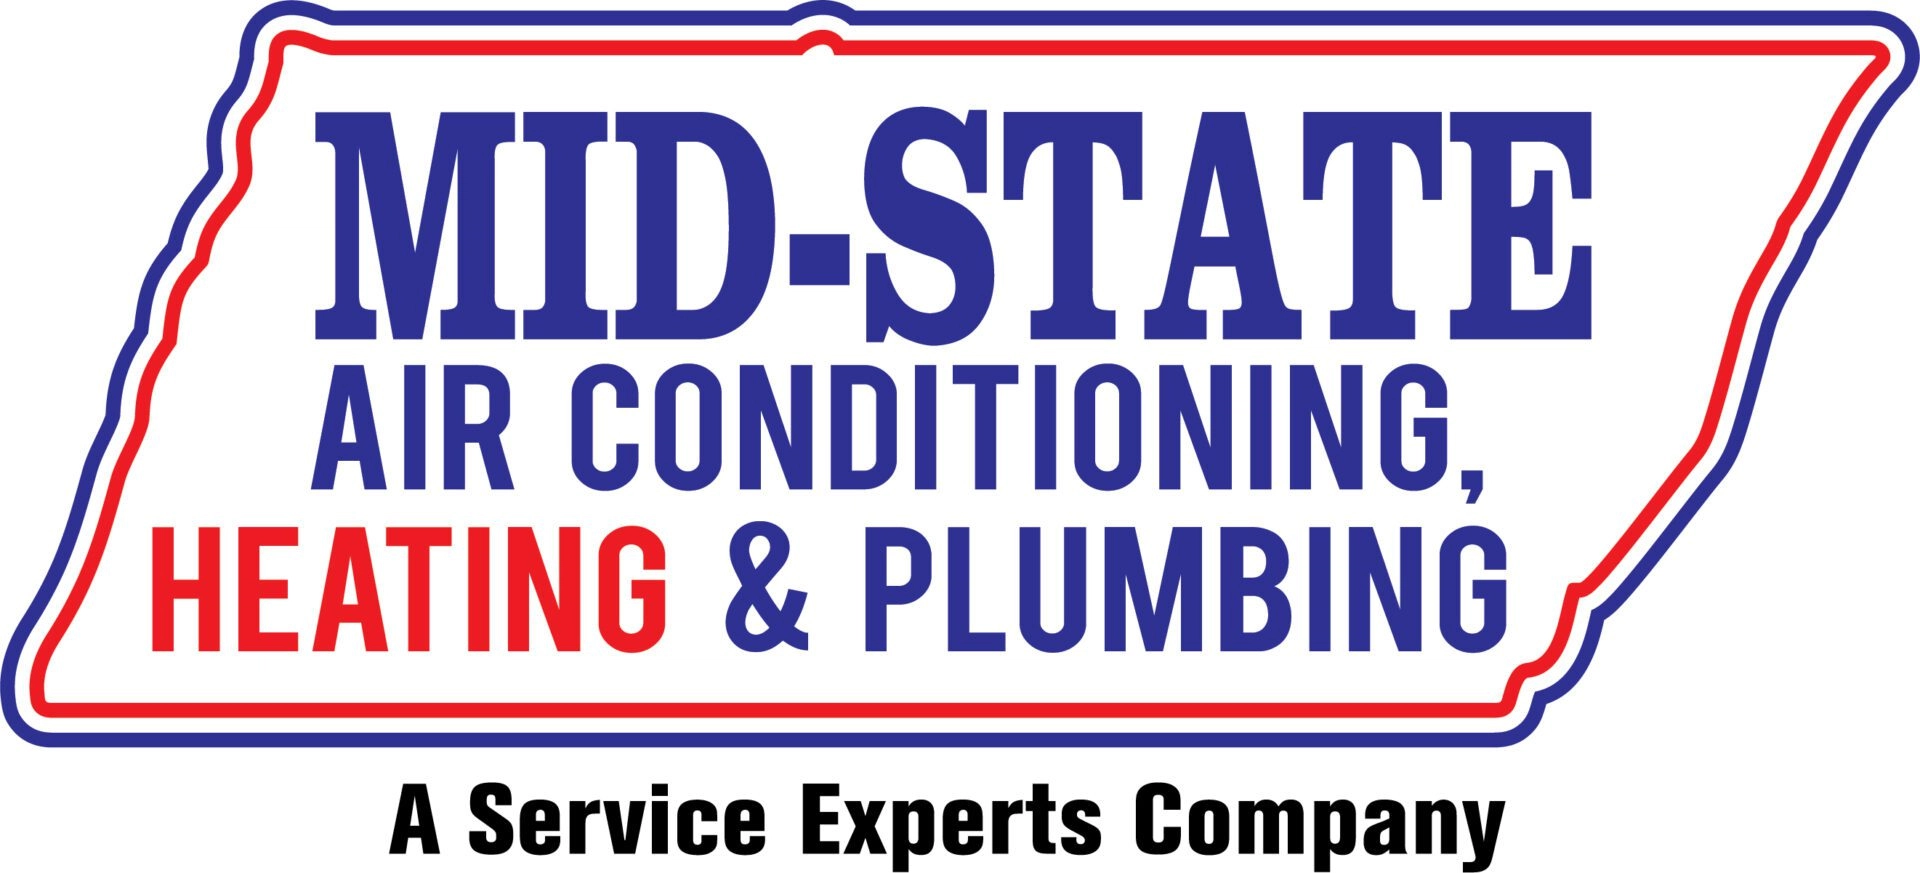 Mid-State Air Conditioning, Heating & Plumbing Logo